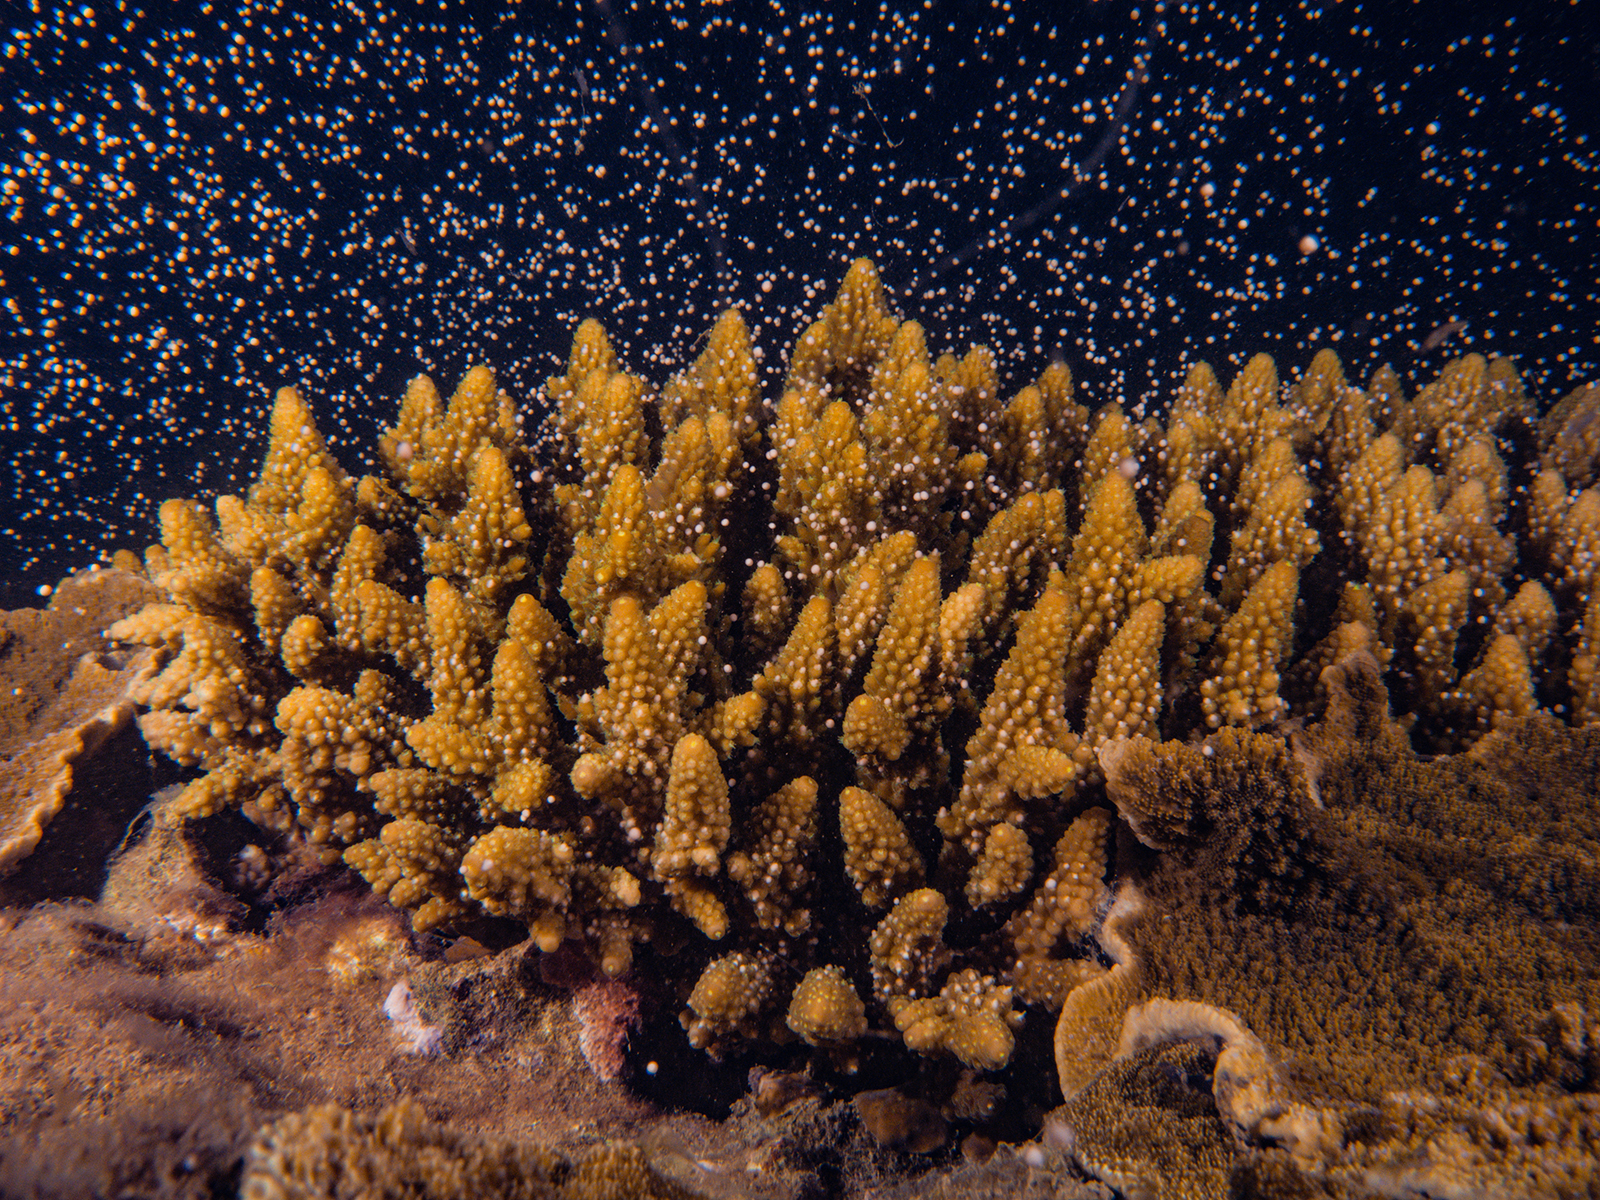 Following the October and November full moon, broadcast spawning corals, such as corals belonging to the genus of Acropora, are releasing egg-sperm bundles in an synchronized event into the ocean. The bundles break up on the way to the water surface, allowing fertilization and the development of actively swimming coral larvae. About one week after the spawning event, the coral larvae are able to attache to the reef substrate and metamorphose into a new coral, starting the coral life cycle once again.